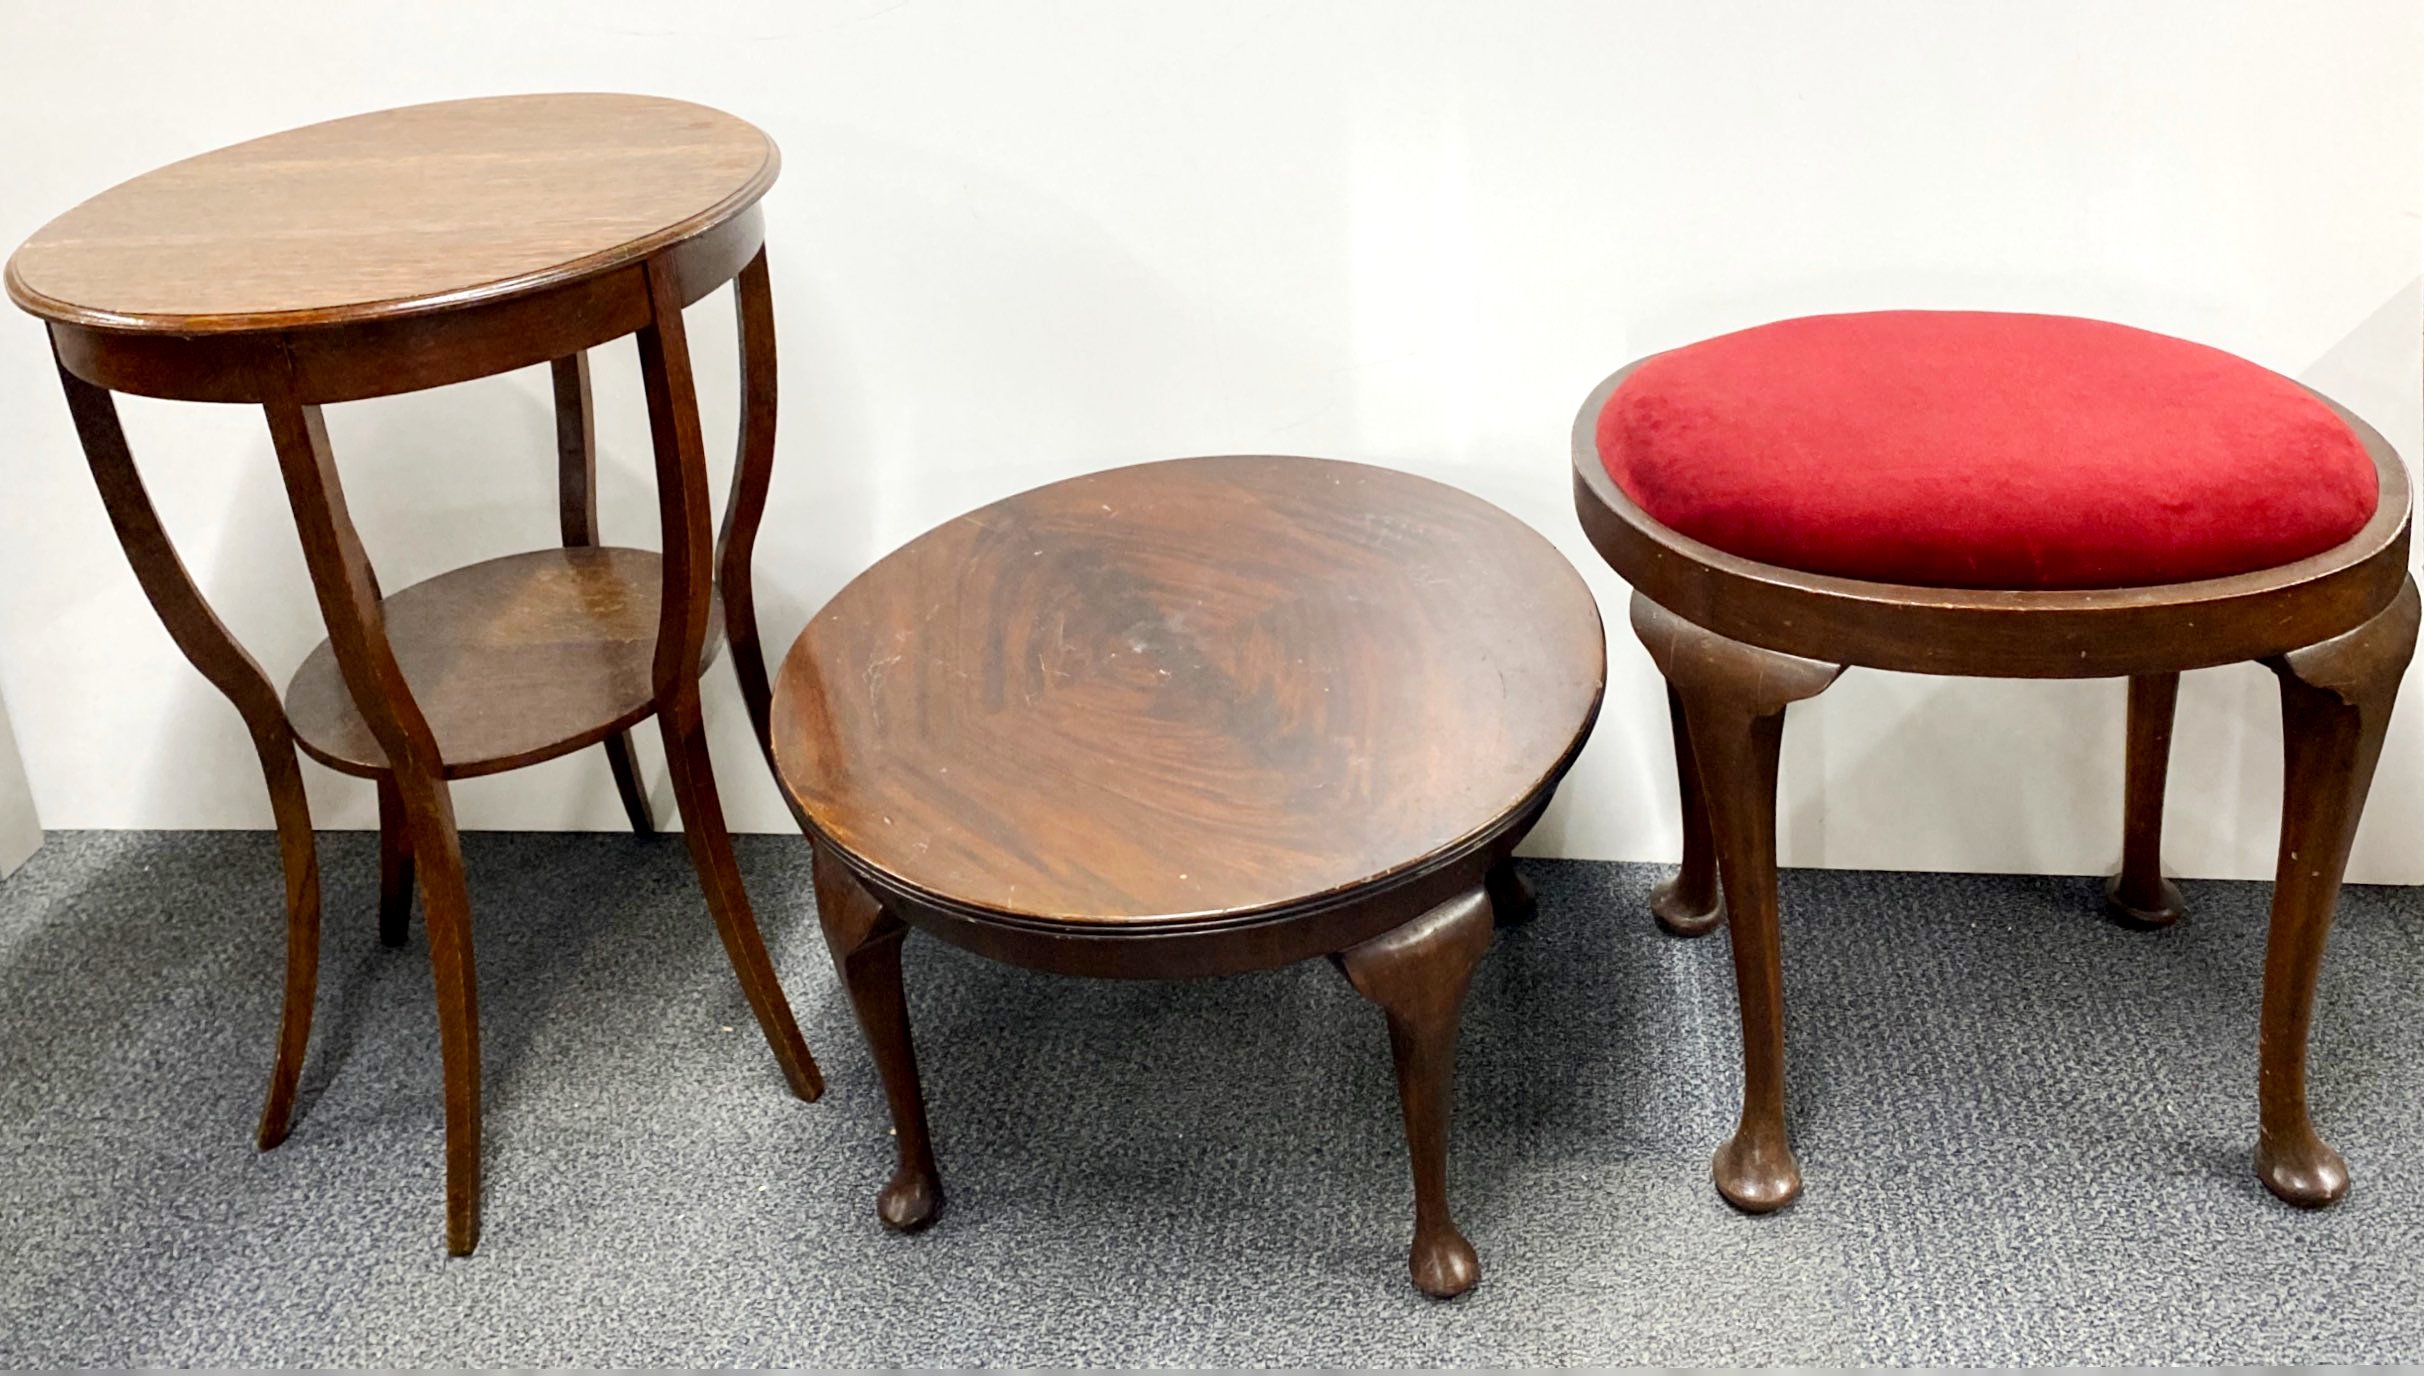 A mahogany dressing table stool and two circular side tables. - Image 2 of 2